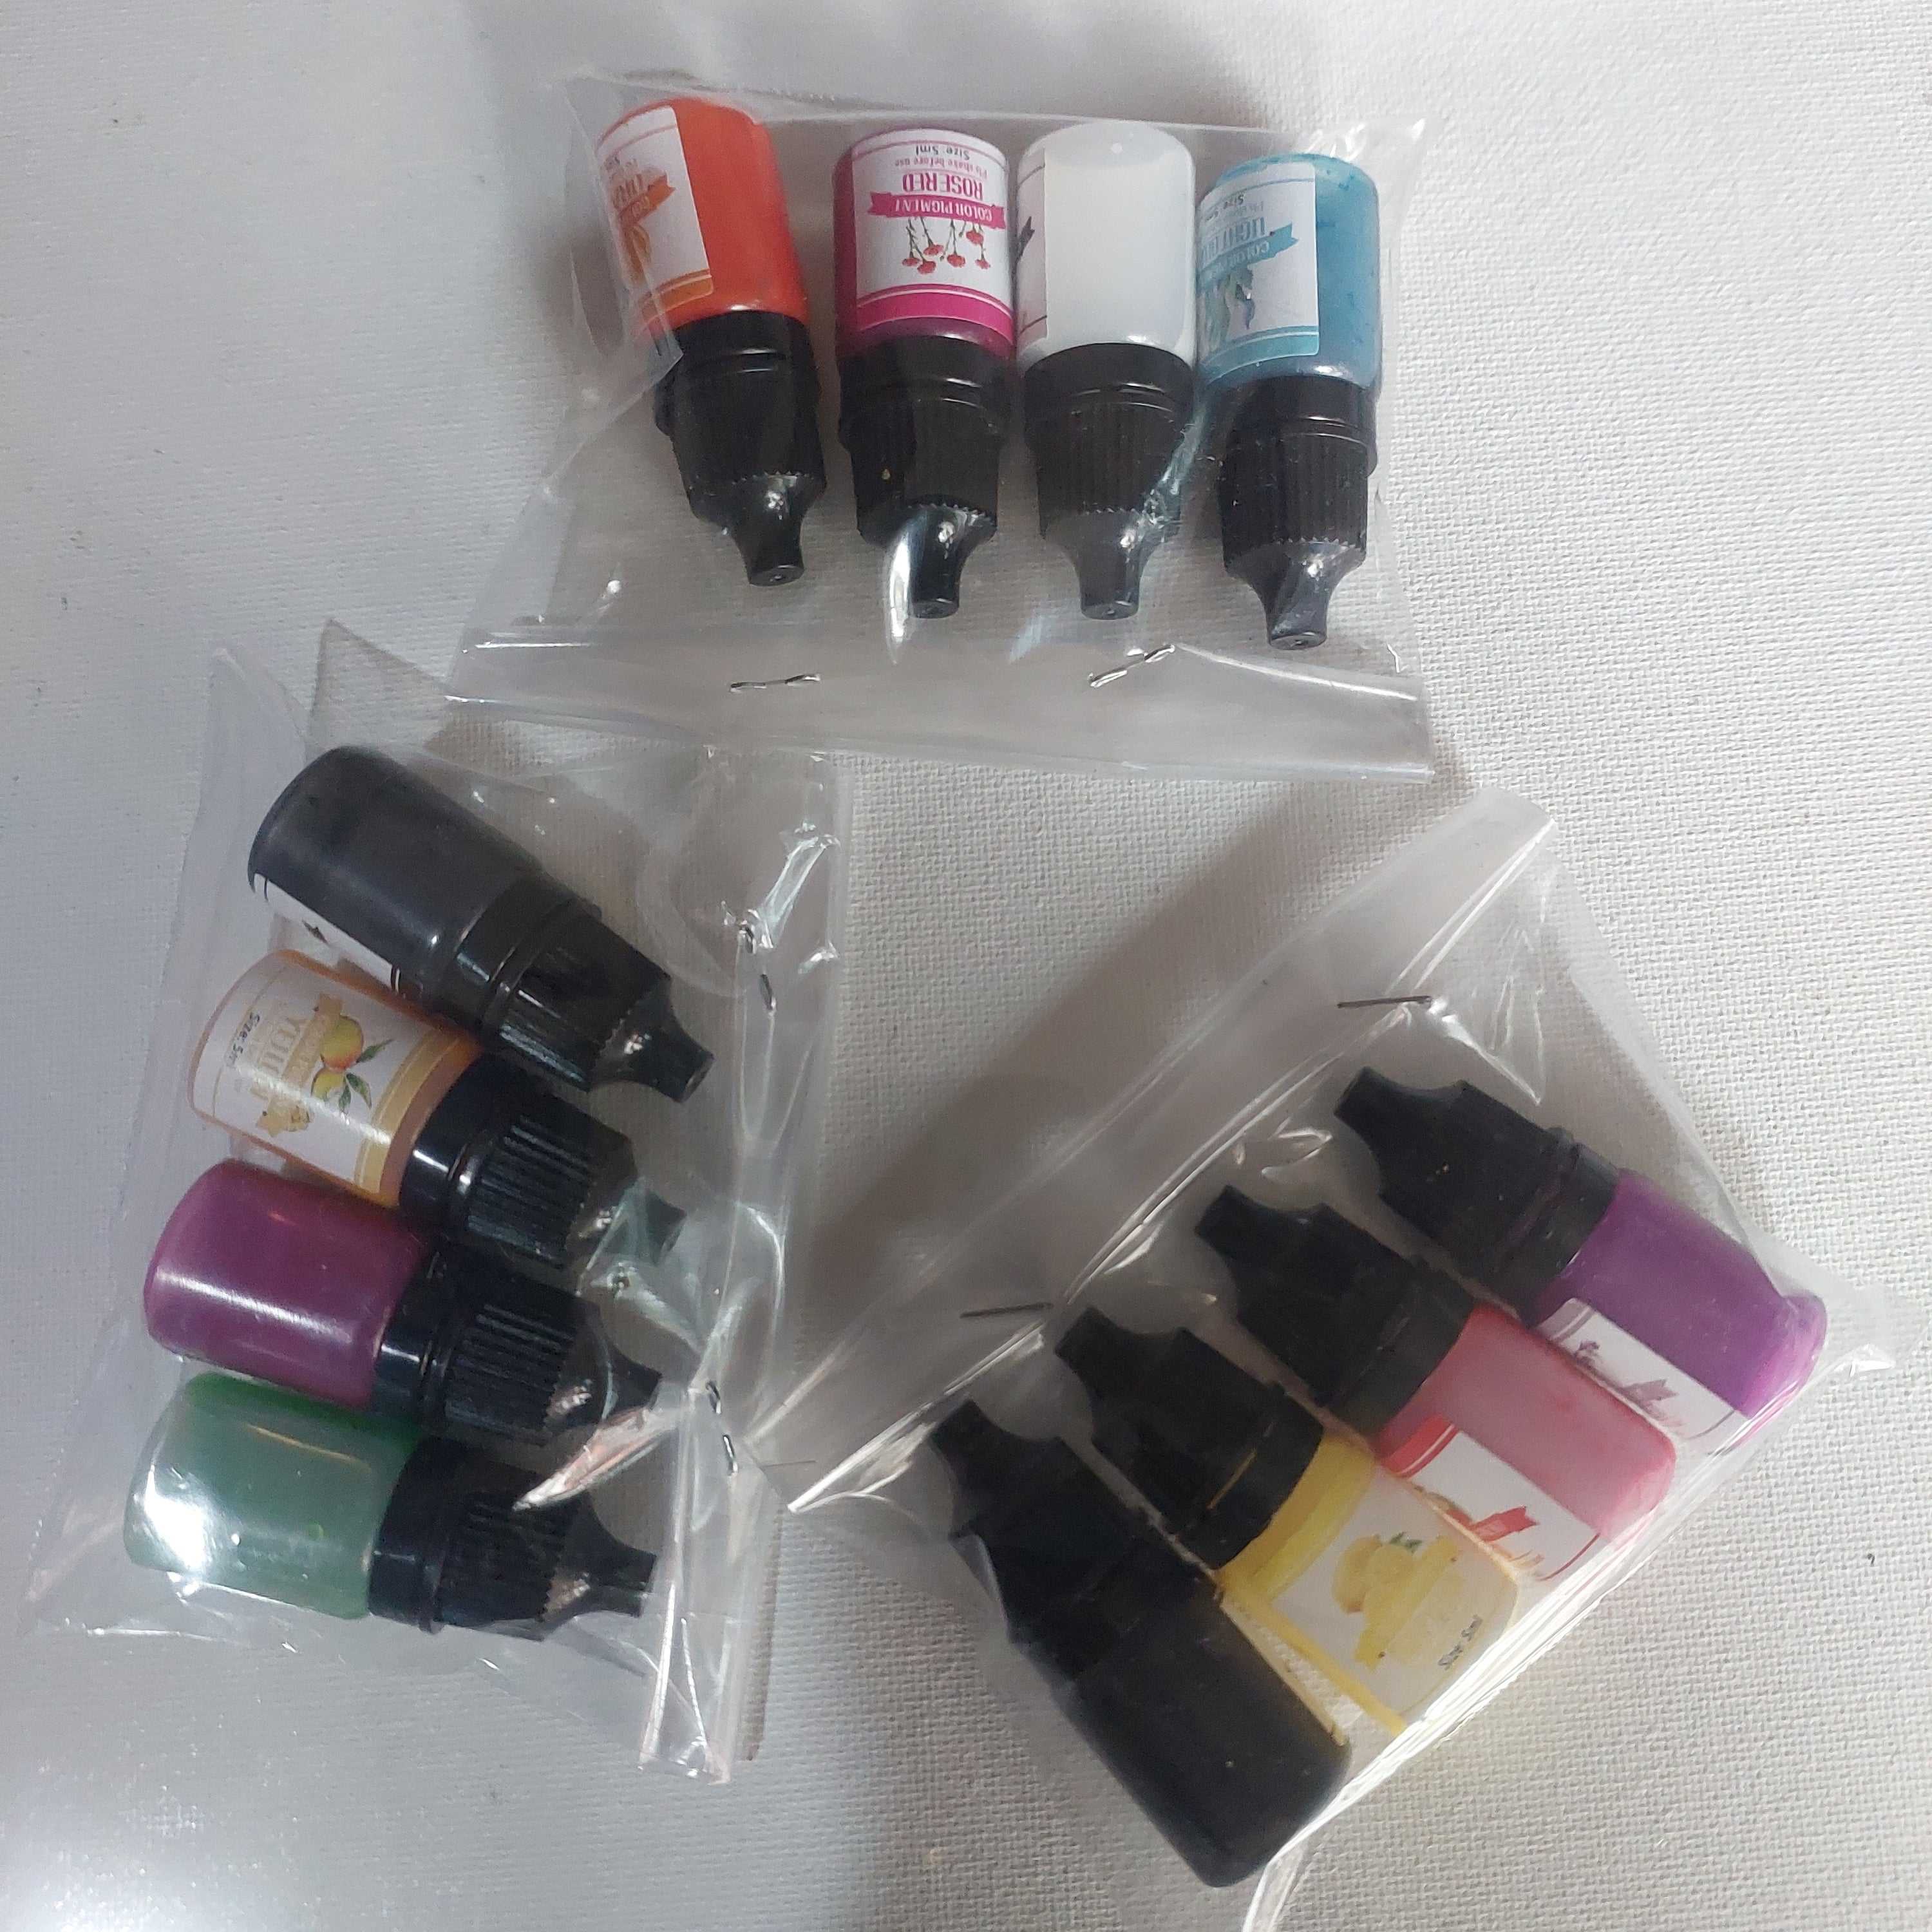 Resin pigment set of 4 assorted colors bottle in a pack